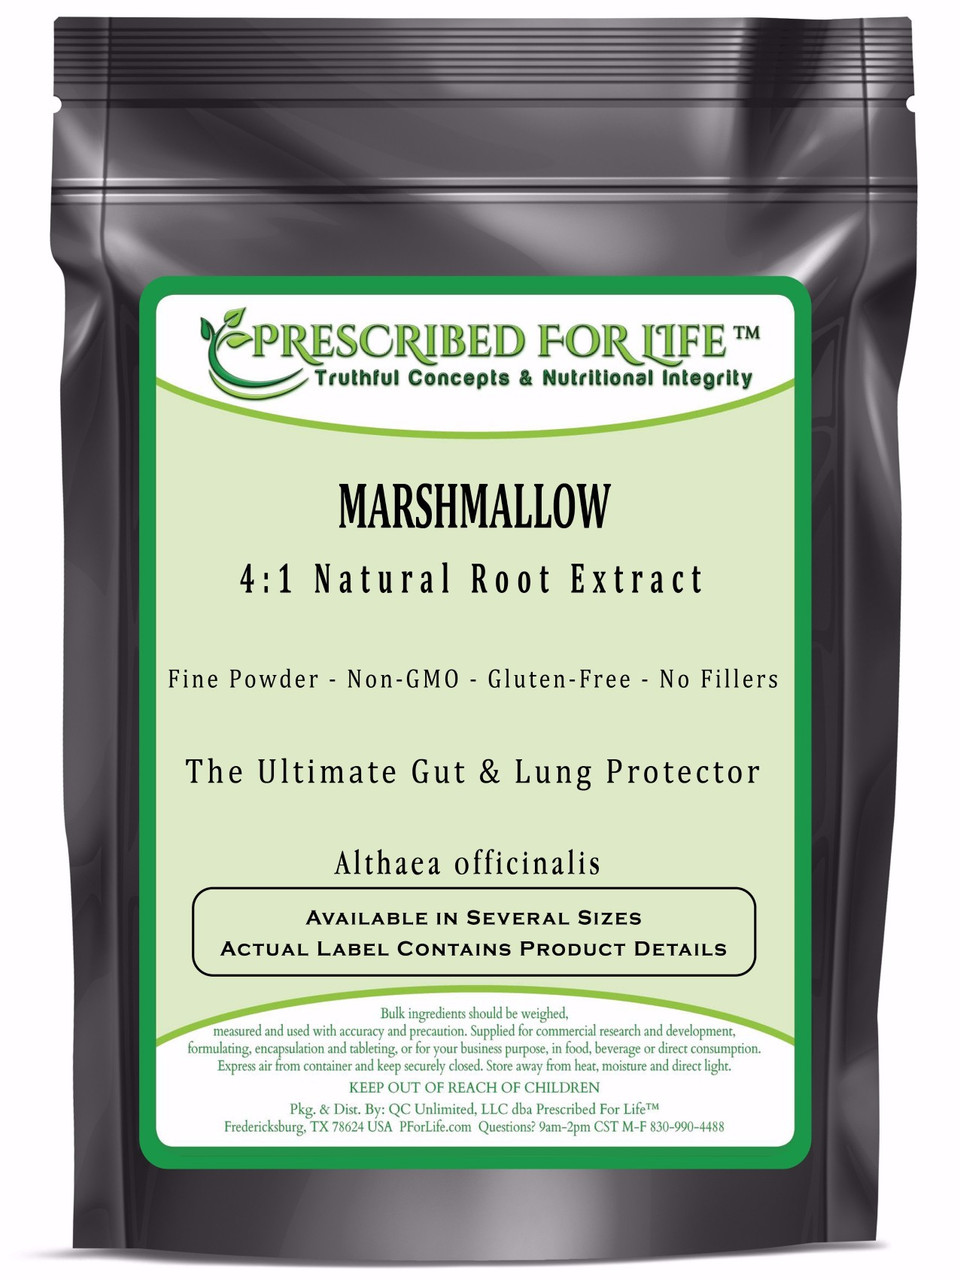 Marshmallow - 4:1 Natural Root Extract Powder (Althaea officinalis)